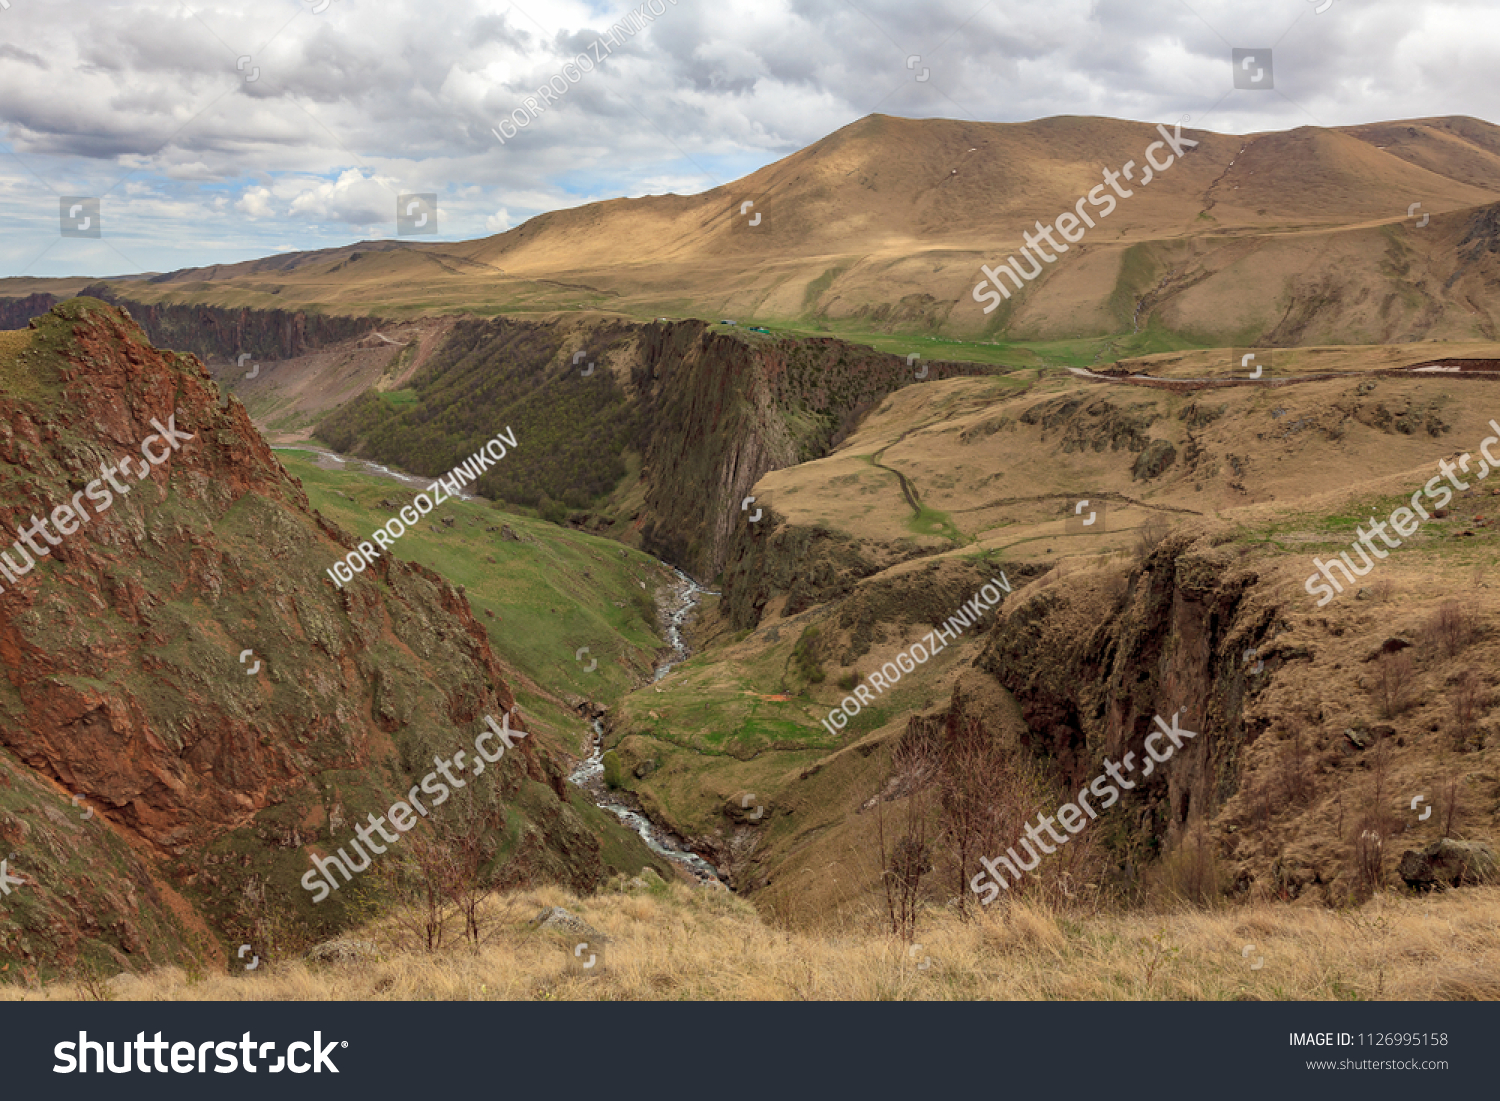 Mountain landscape. The region of Elbrus, Karachay-Cherkessia, Russia. The gorge of the Malka River, the Gyly-Su tract.
The place of exit of curative mineral springs and volcanic rocks. #1126995158